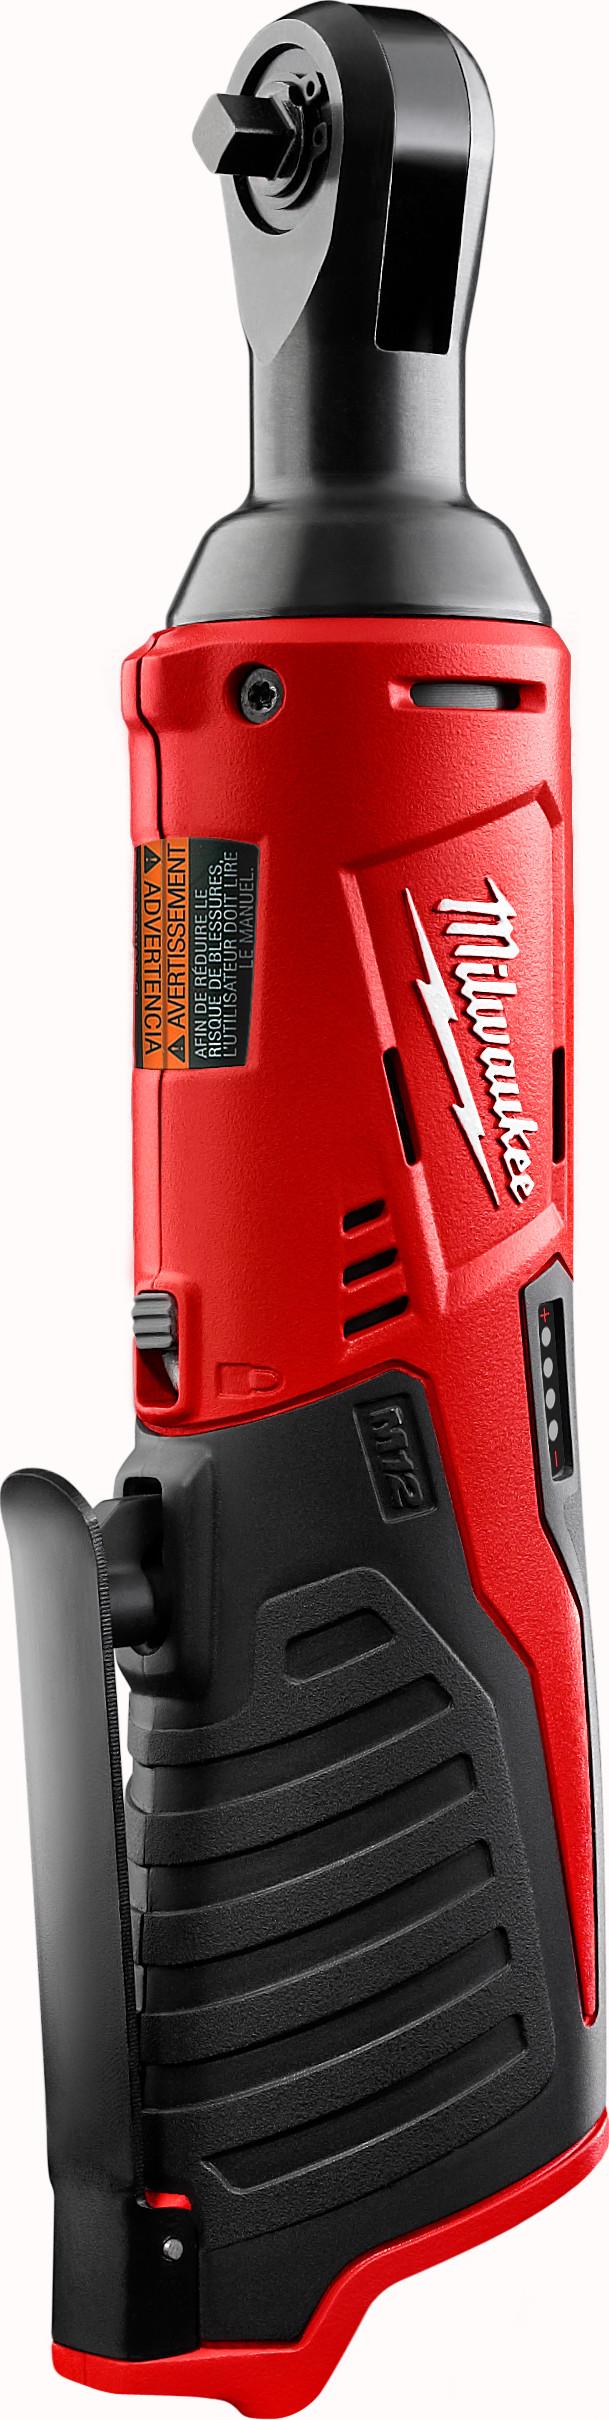 Milwaukee® M12™ FUEL™ 2454-20 Compact Cordless Impact Wrench, 3/8 in Straight Drive, 2650/3500 bpm, 117 ft-lb Torque, 12 VDC, 6-1/2 in OAL